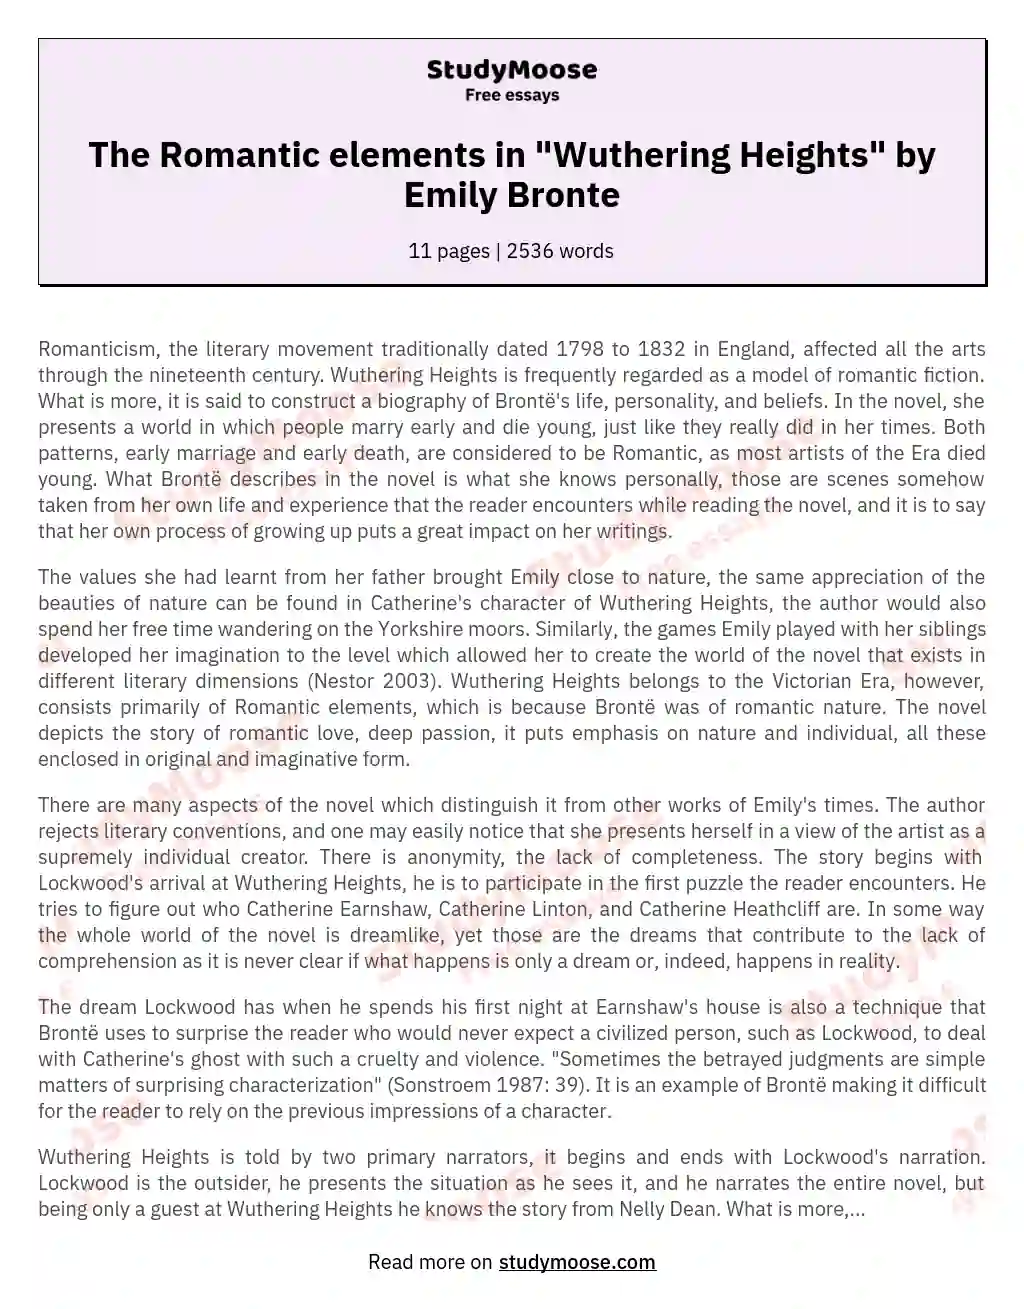 The Romantic elements in "Wuthering Heights" by Emily Bronte